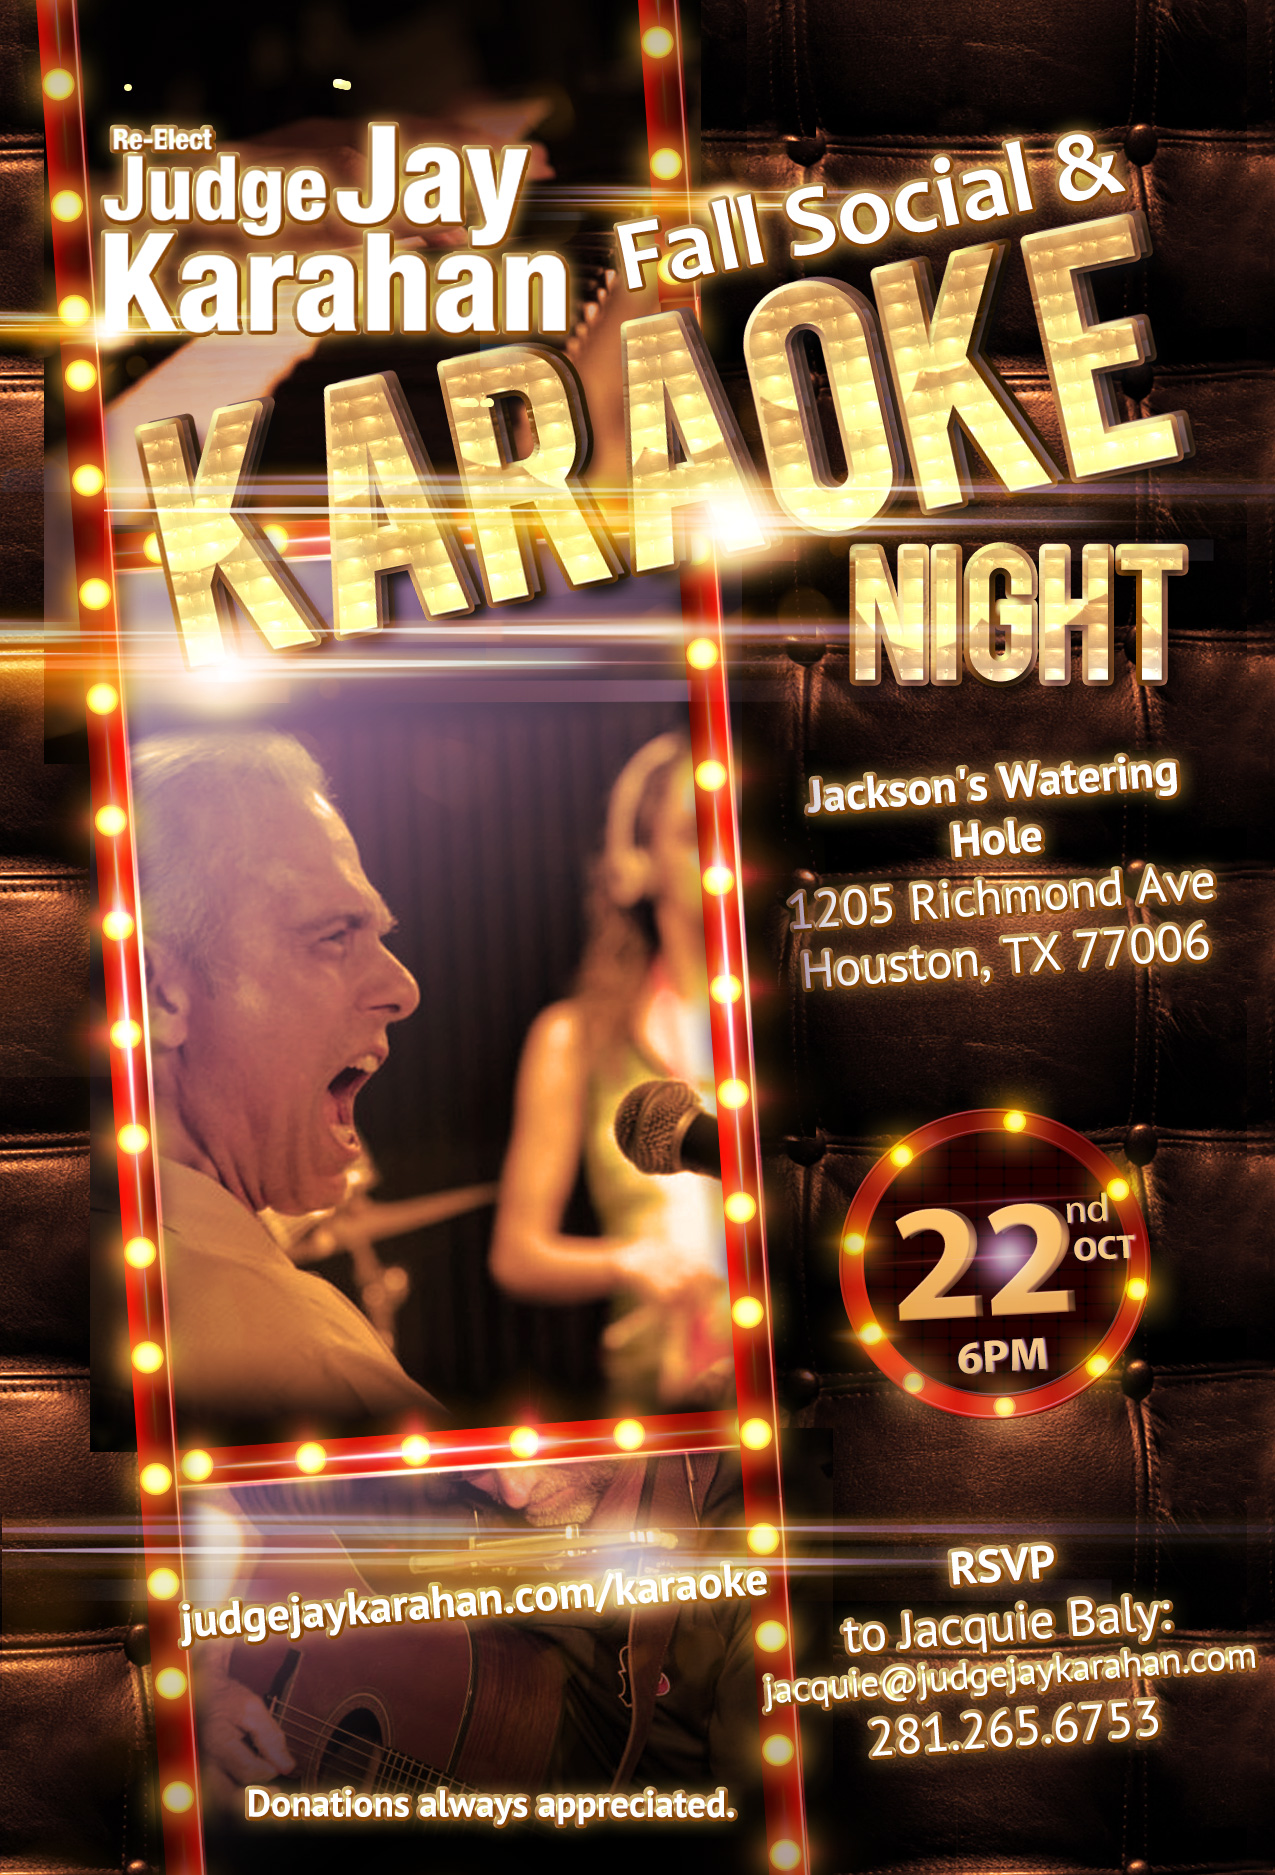 Fall Social and Karaoke with Judge Jay on October 22!